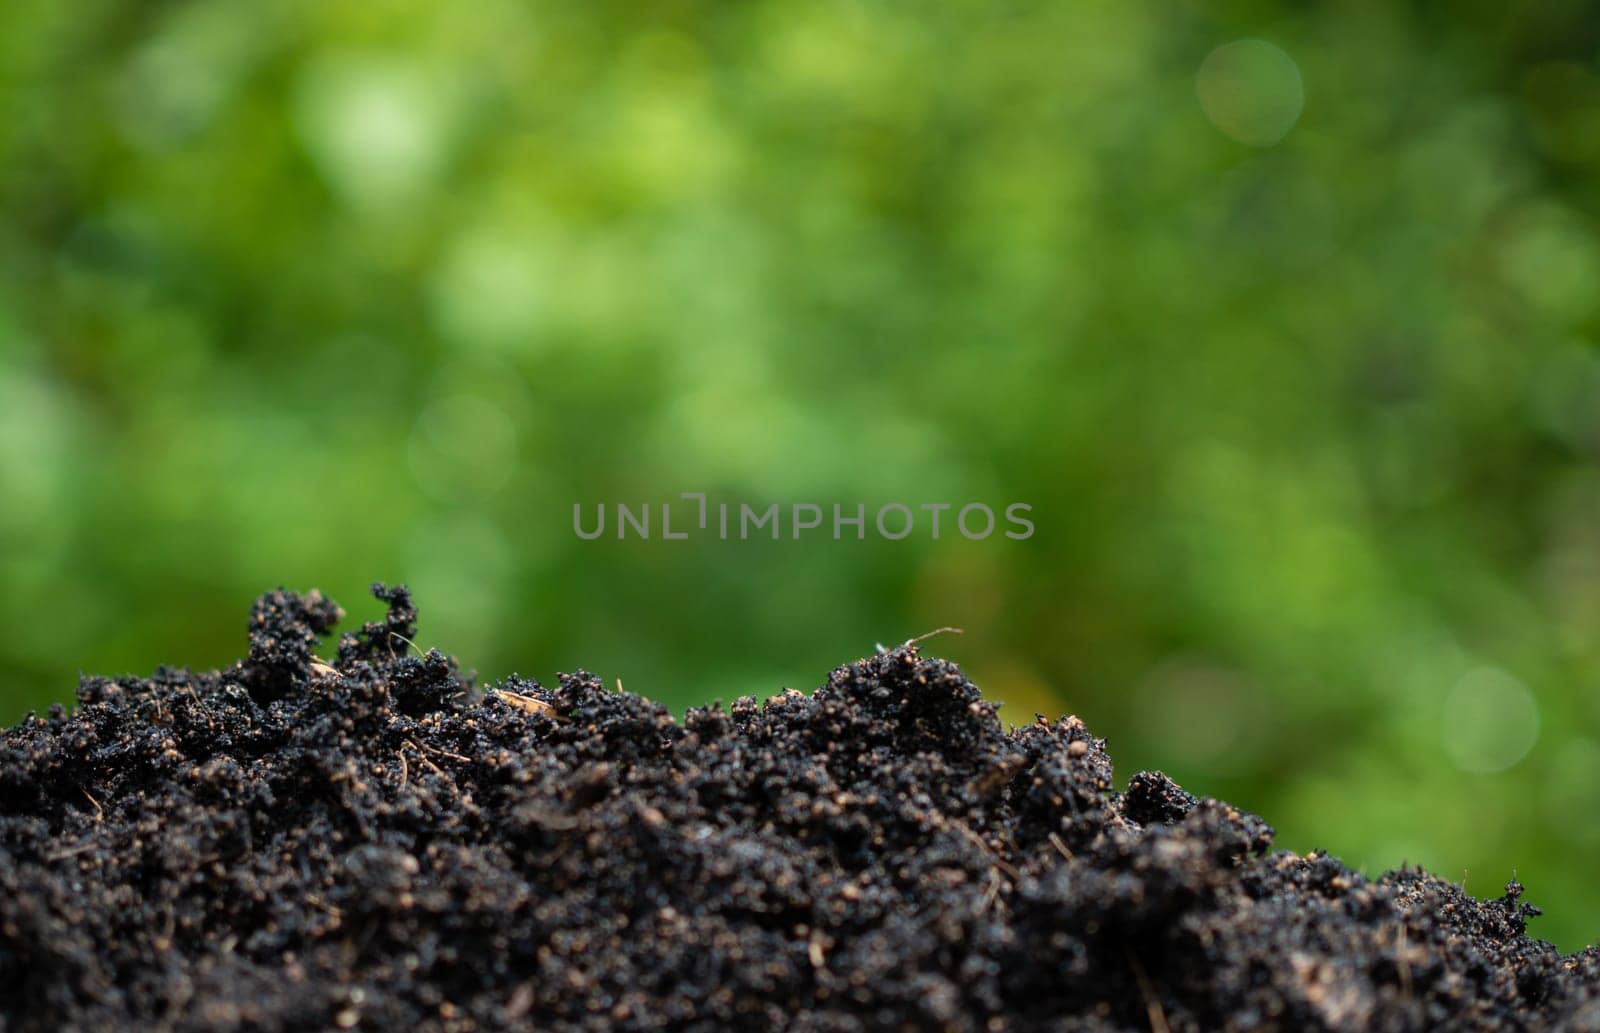 Background with soil and green from nature. Environmental protection concept, reforestation, CO2 reduction, recycle. by Unimages2527